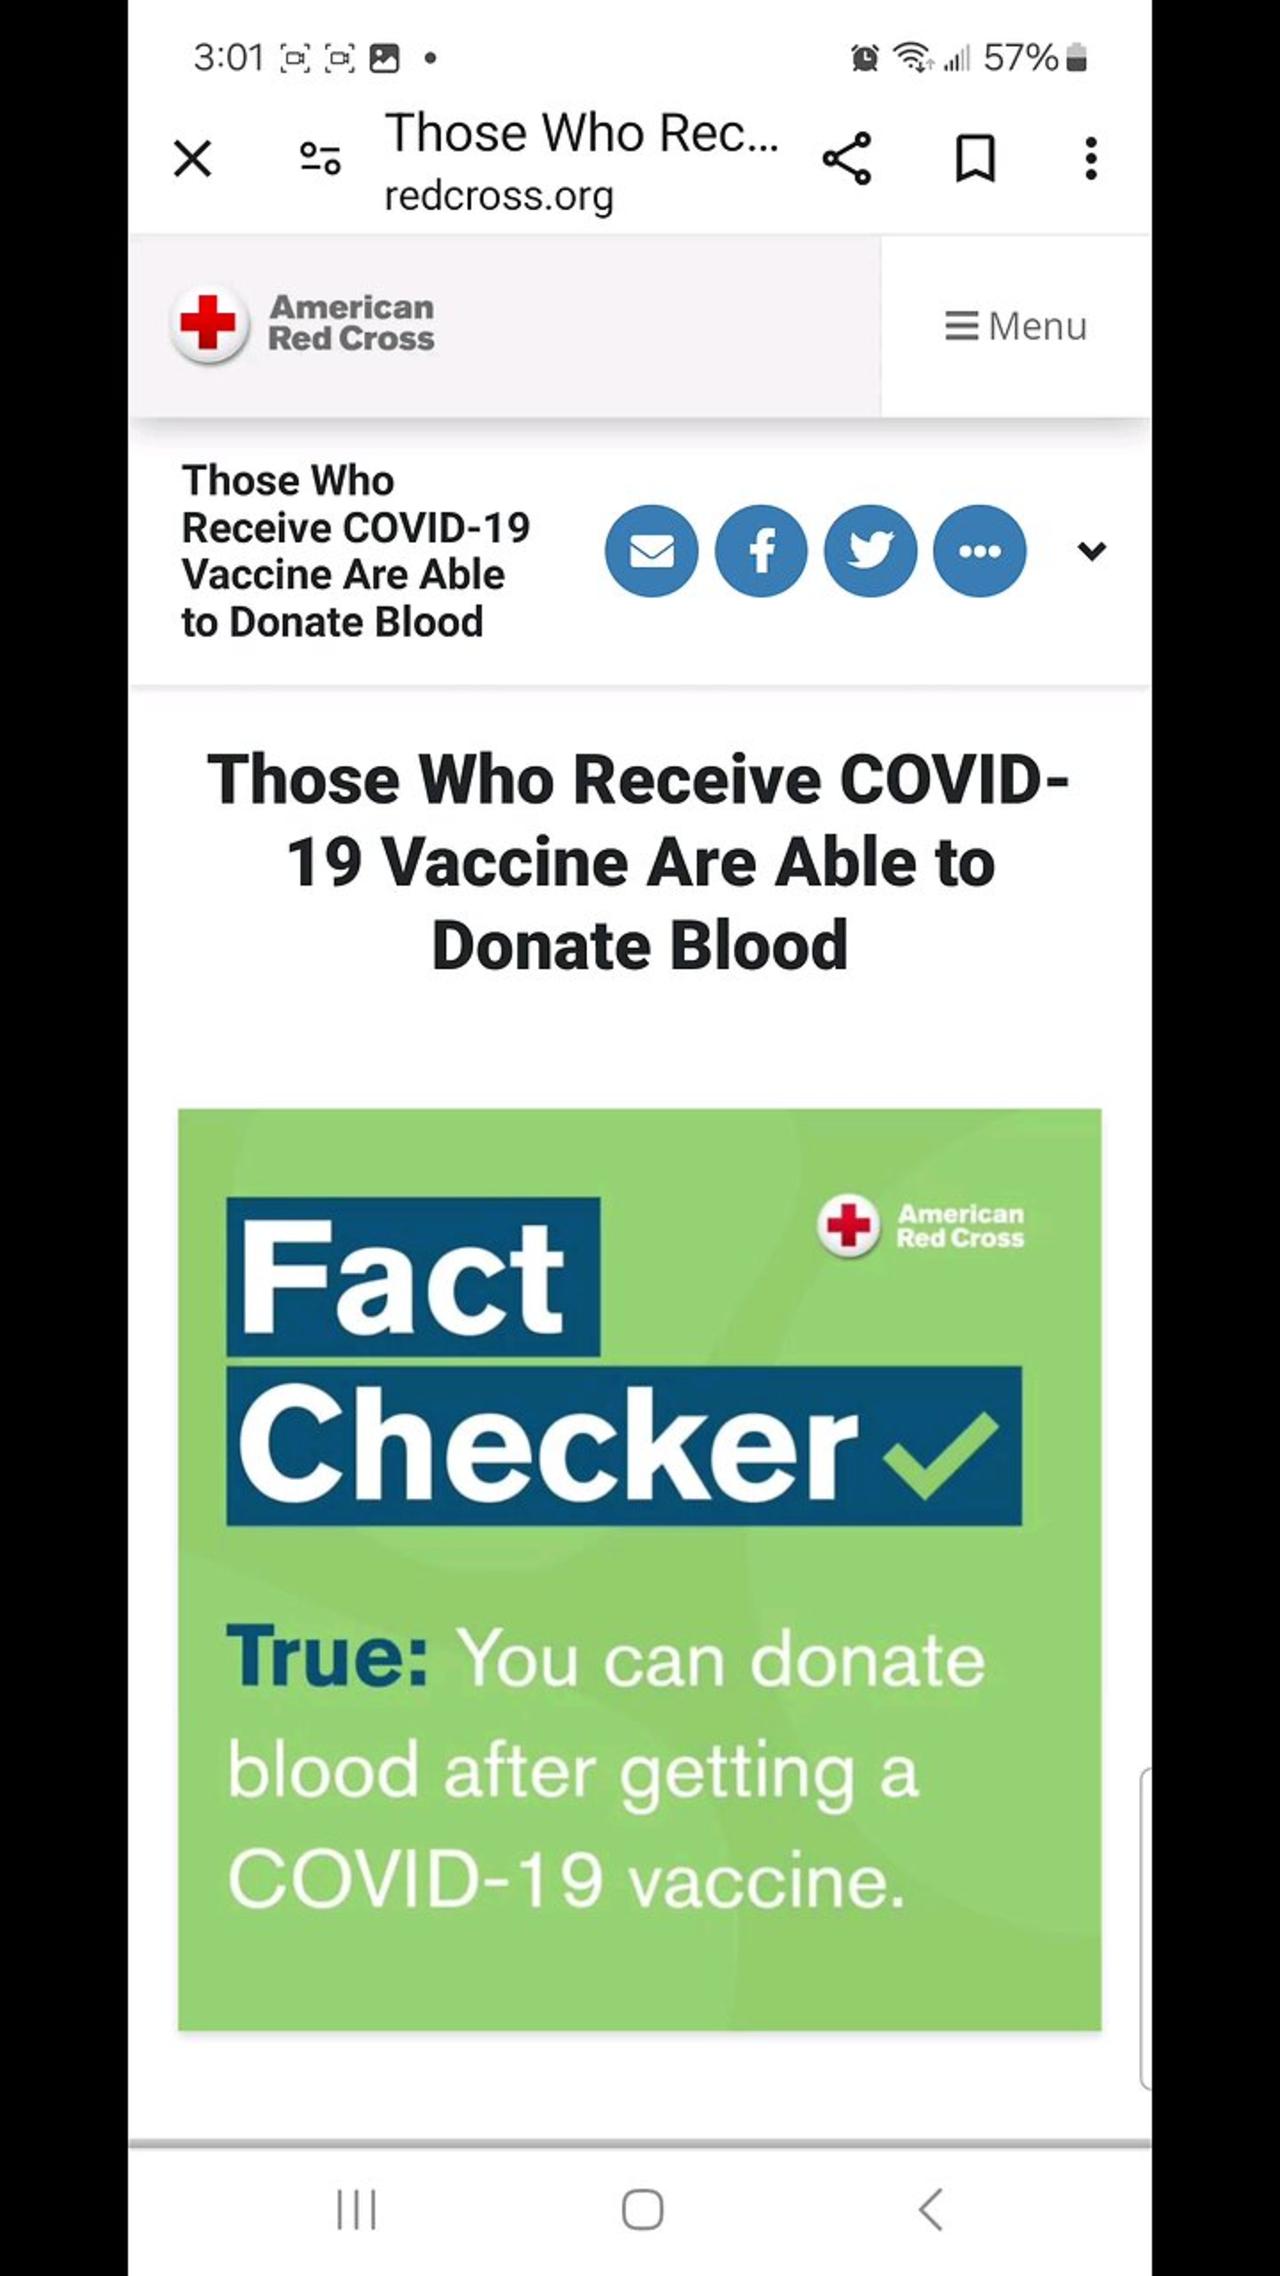 Are Blood Banks contaminated due to covid vaccine  donors  ! Yes they are !!!